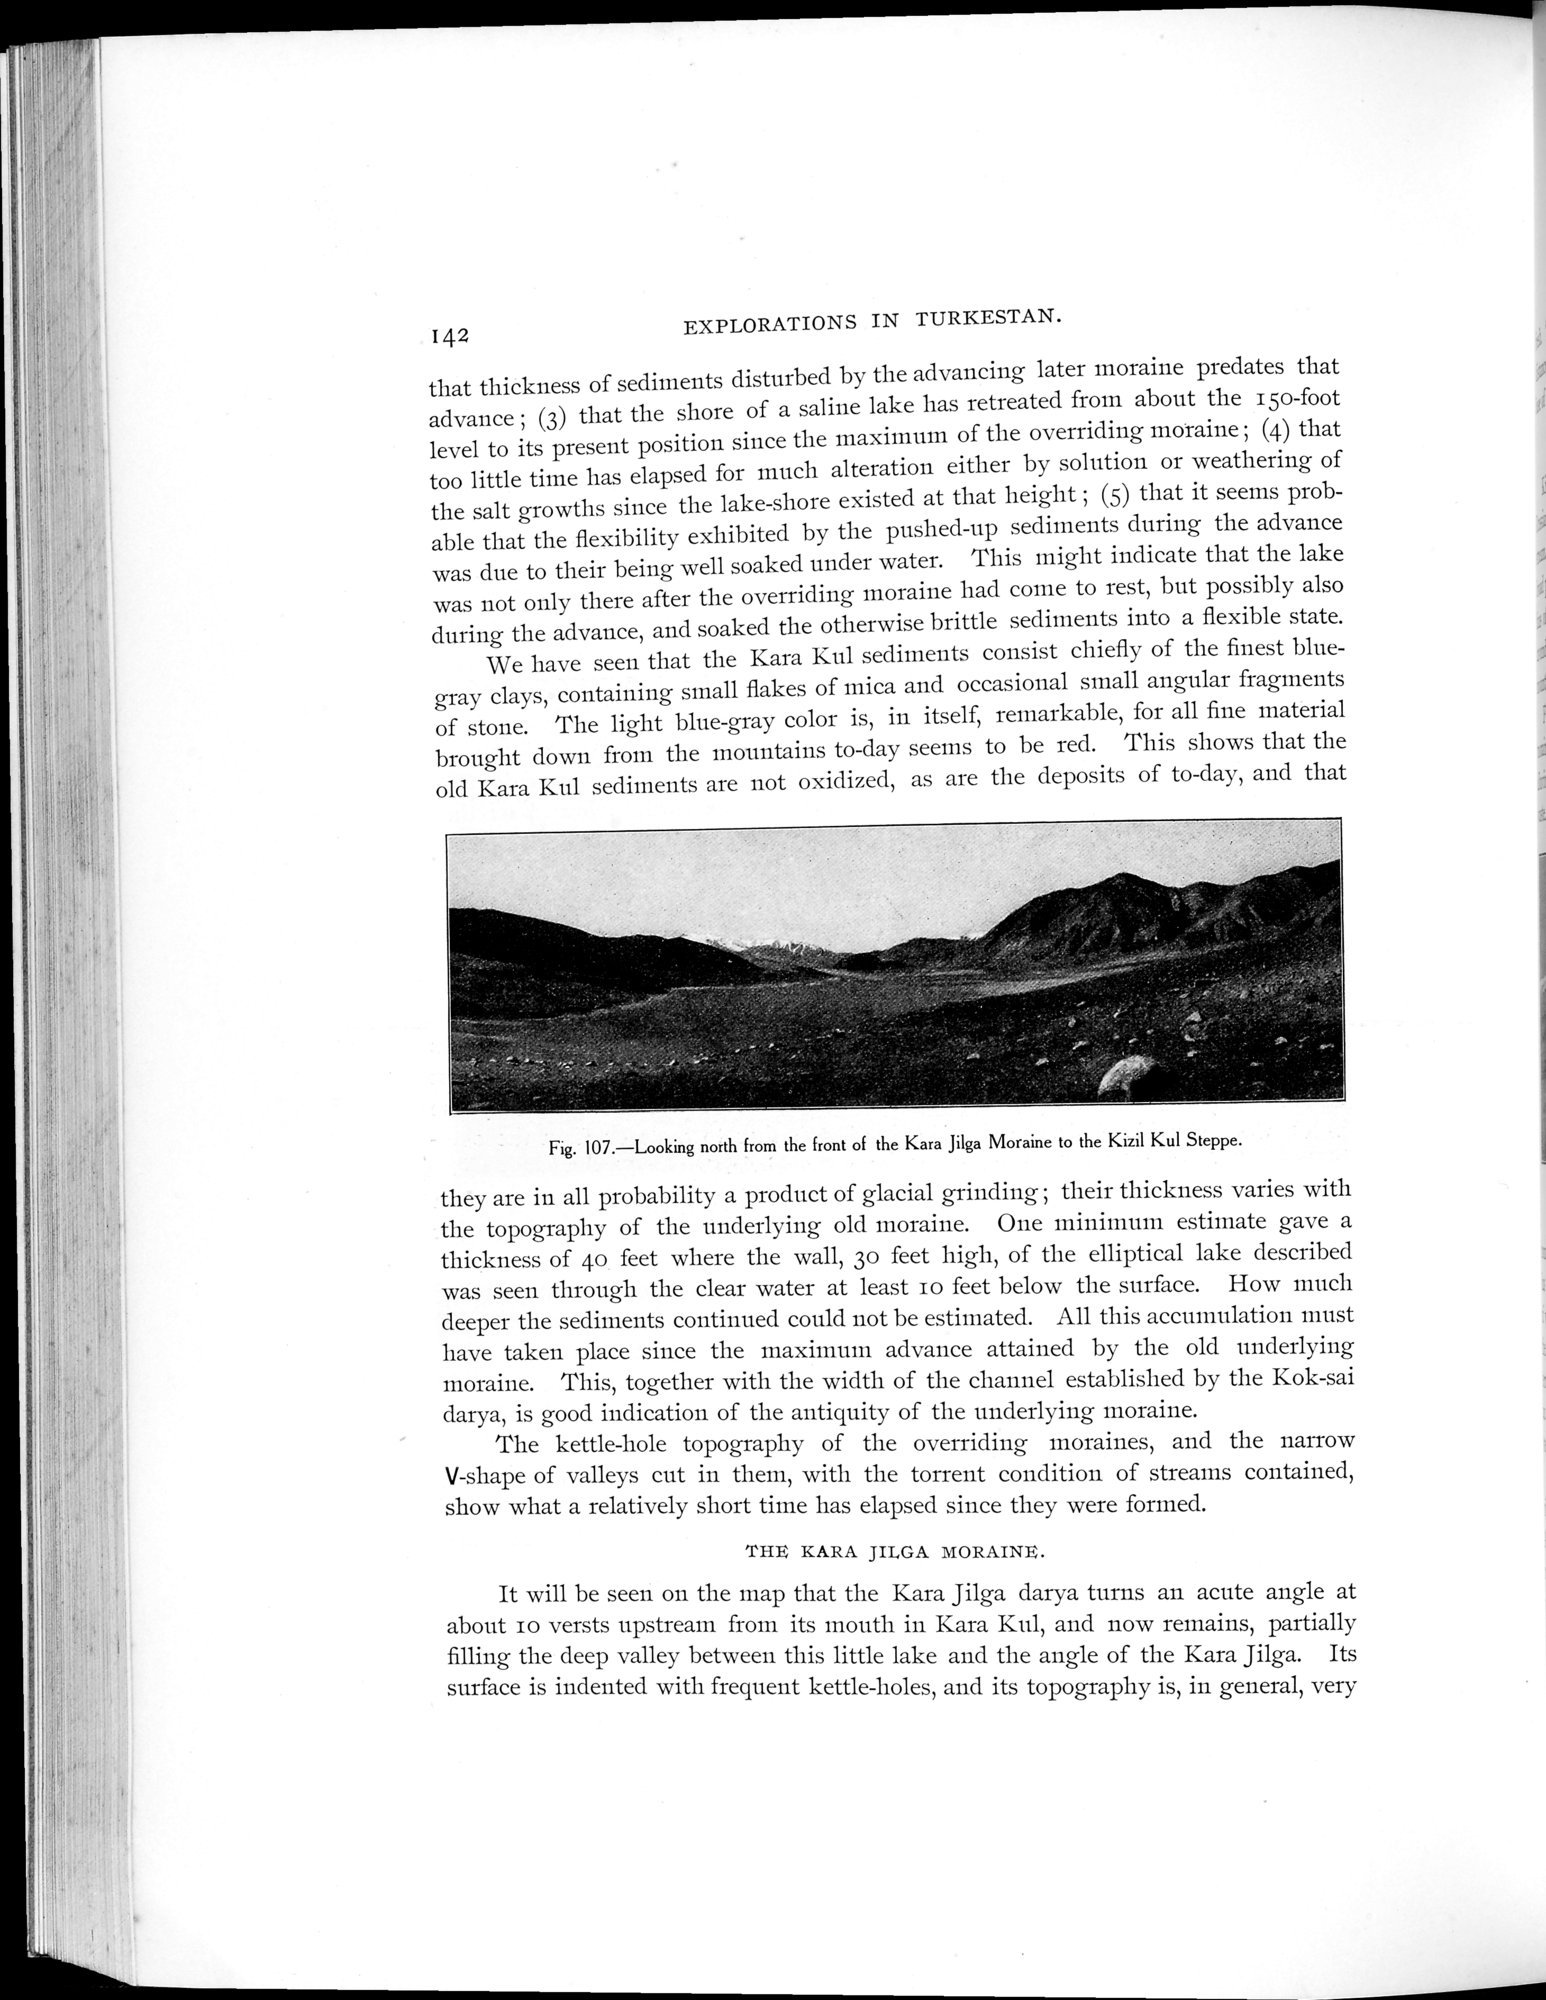 Explorations in Turkestan 1903 : vol.1 / Page 168 (Grayscale High Resolution Image)